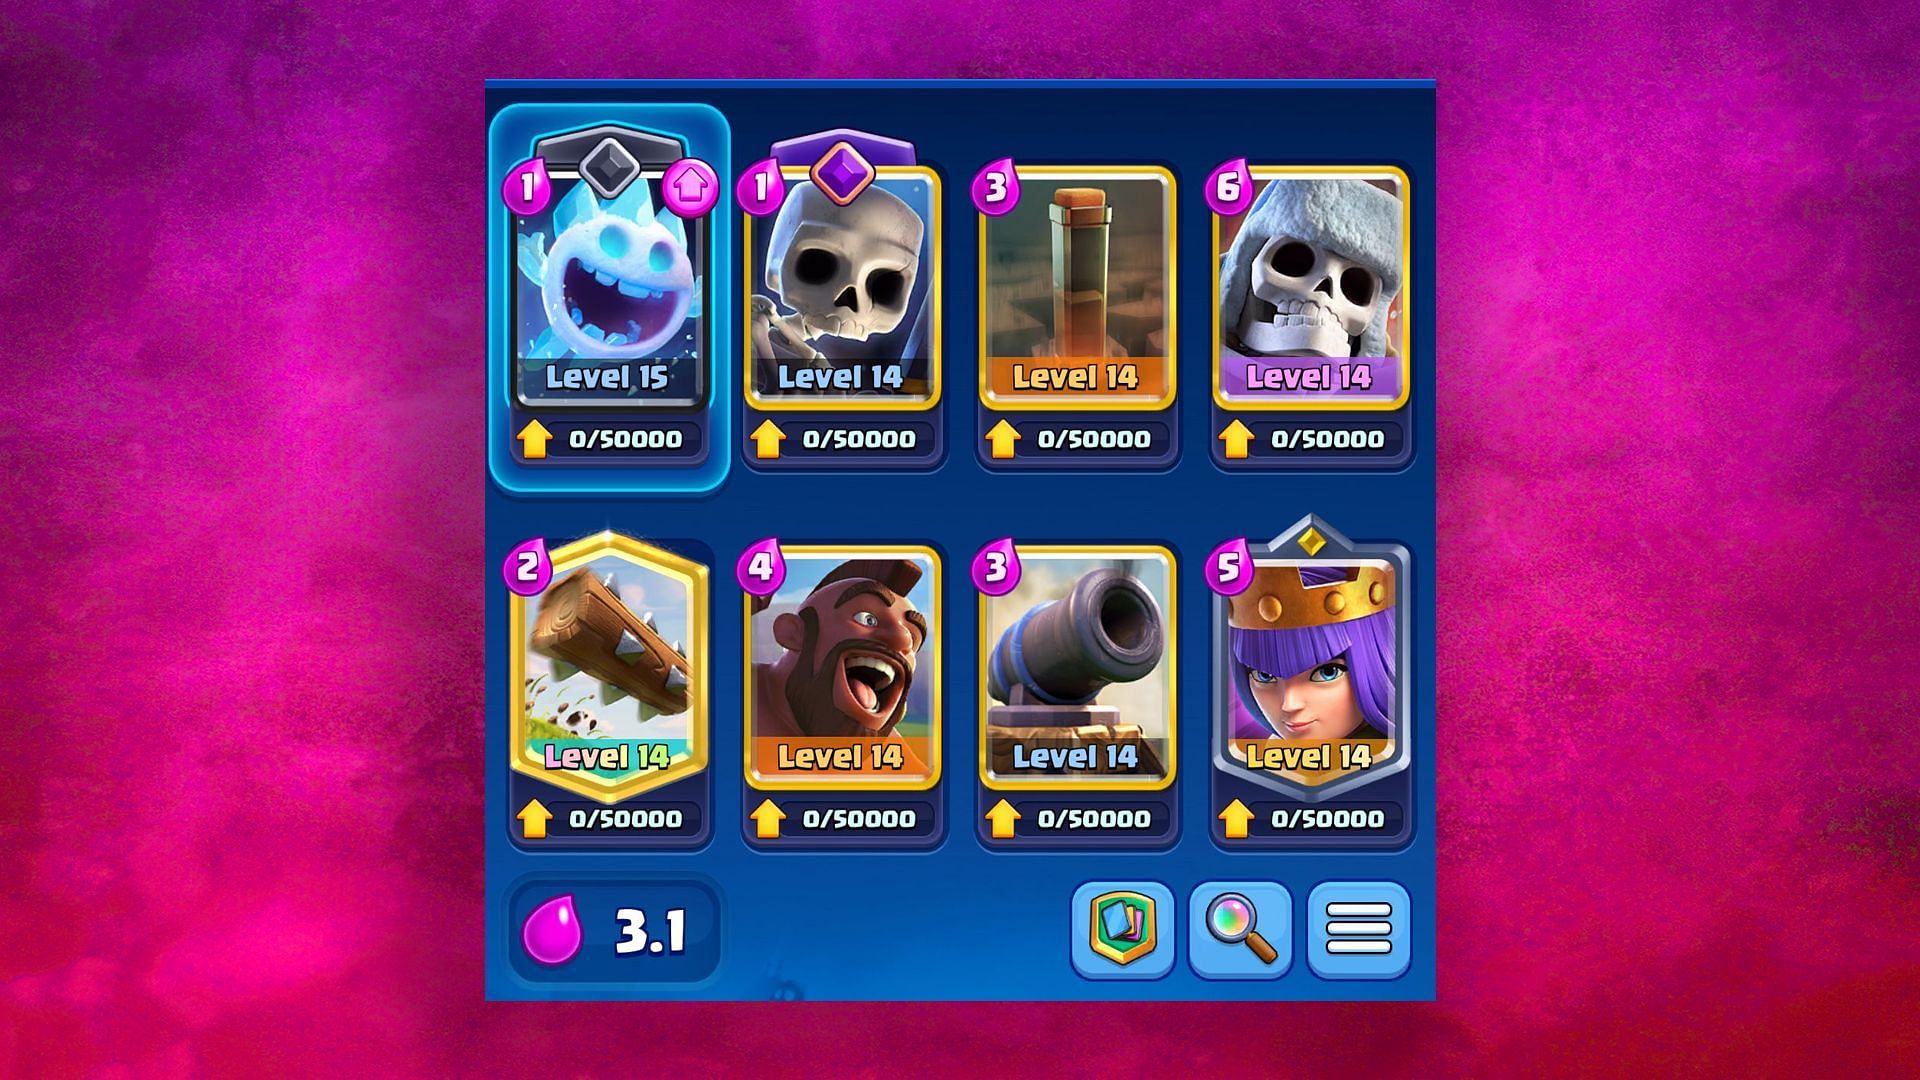 Giant Skeleton has become very good after the buff to its Health Points in the last update (Image via Supercell)